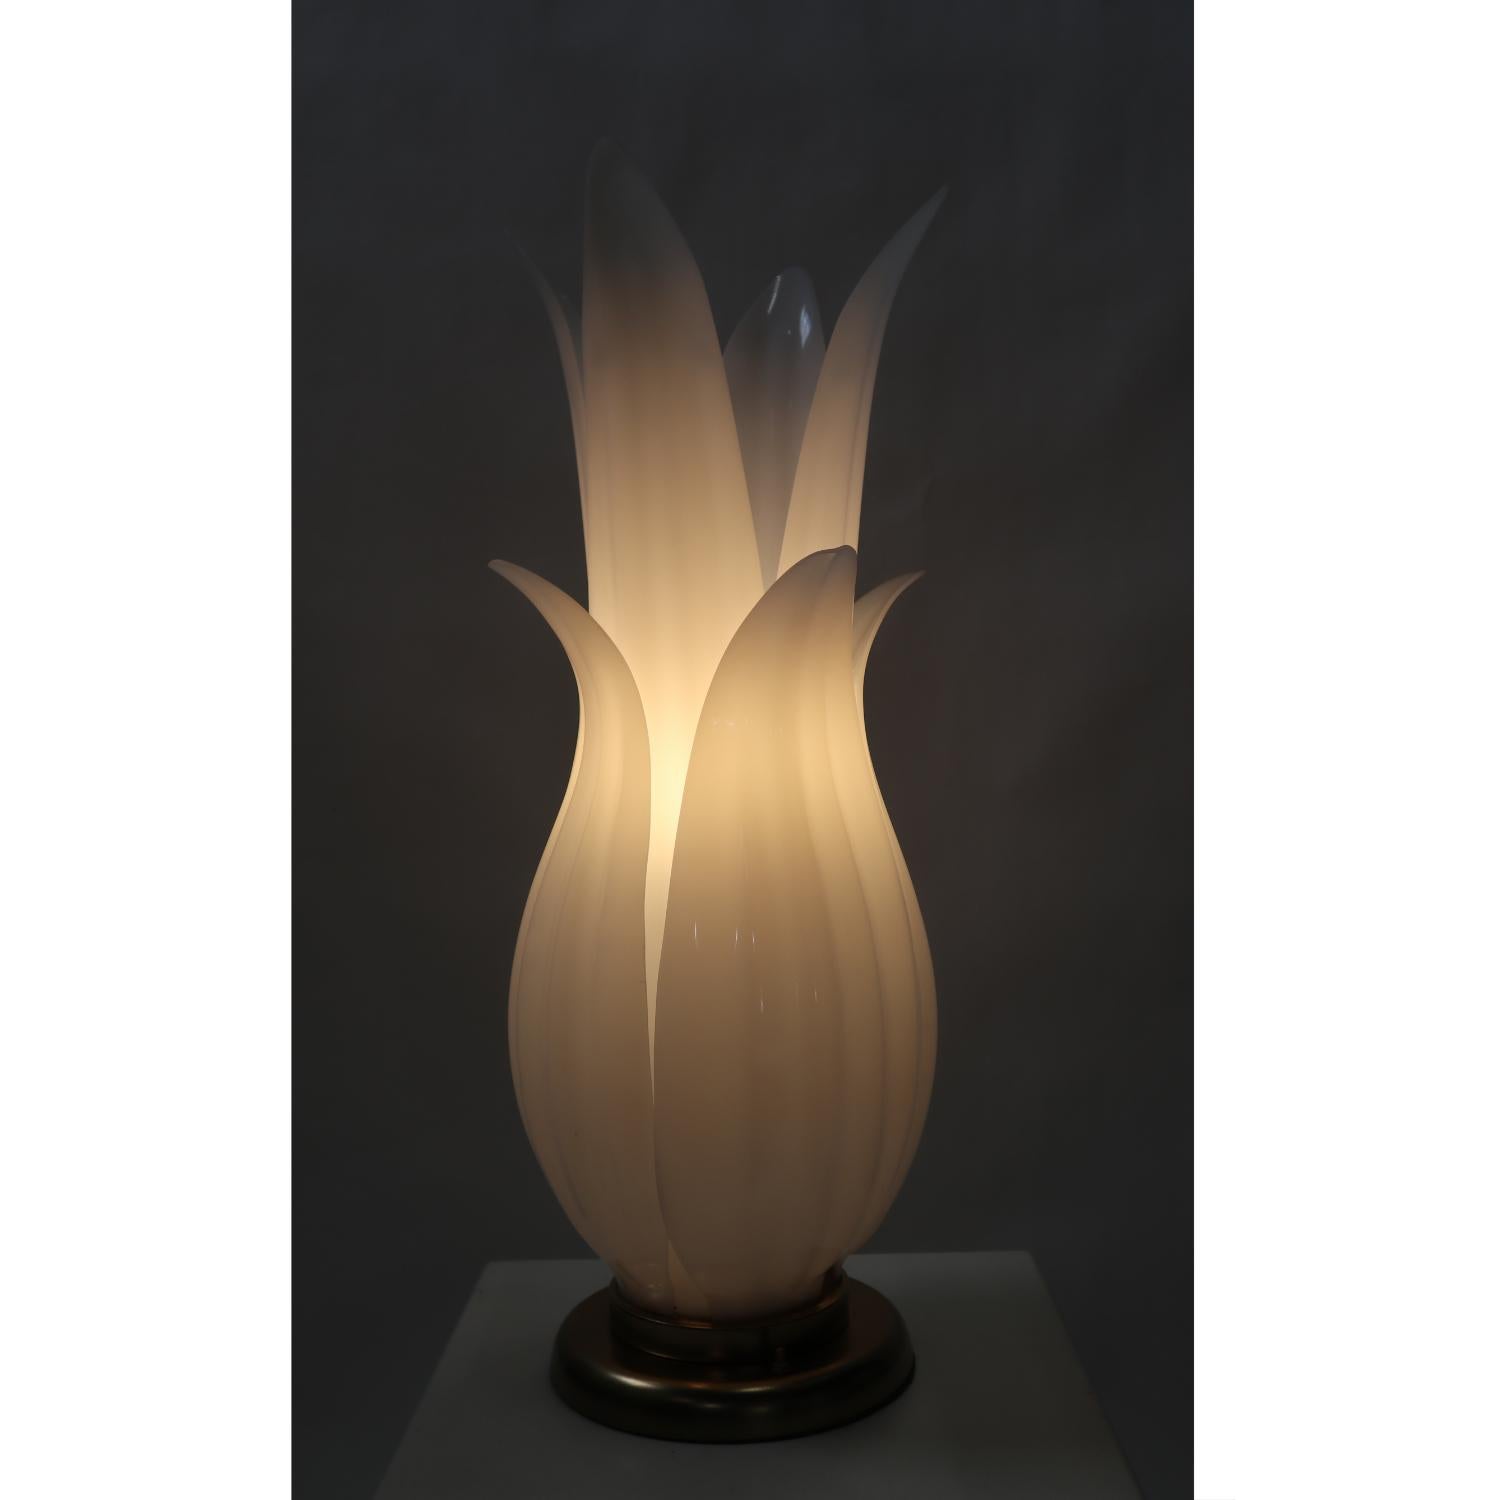 Captivating botanical table lamp featuring oversized white leaves emerging from a gold base. Designed after Rougier’s iconic Floriform lamps. The vintage late 1970s, early 1980s lamp evokes a luxurious spirit with the it’s grandiose size and obtuse